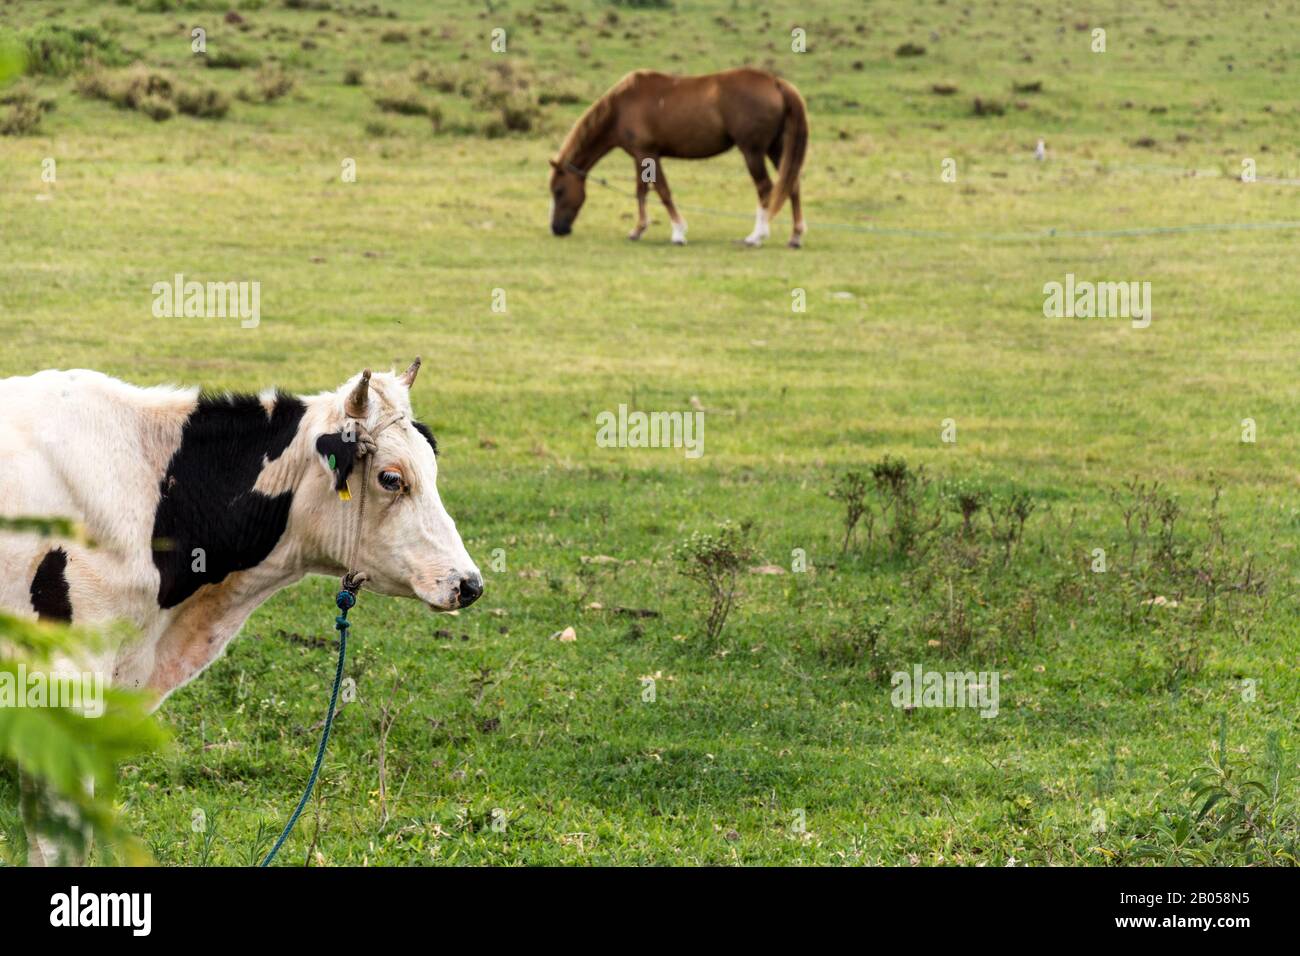 White cow with black spots and brown horse on the grass. Stock Photo